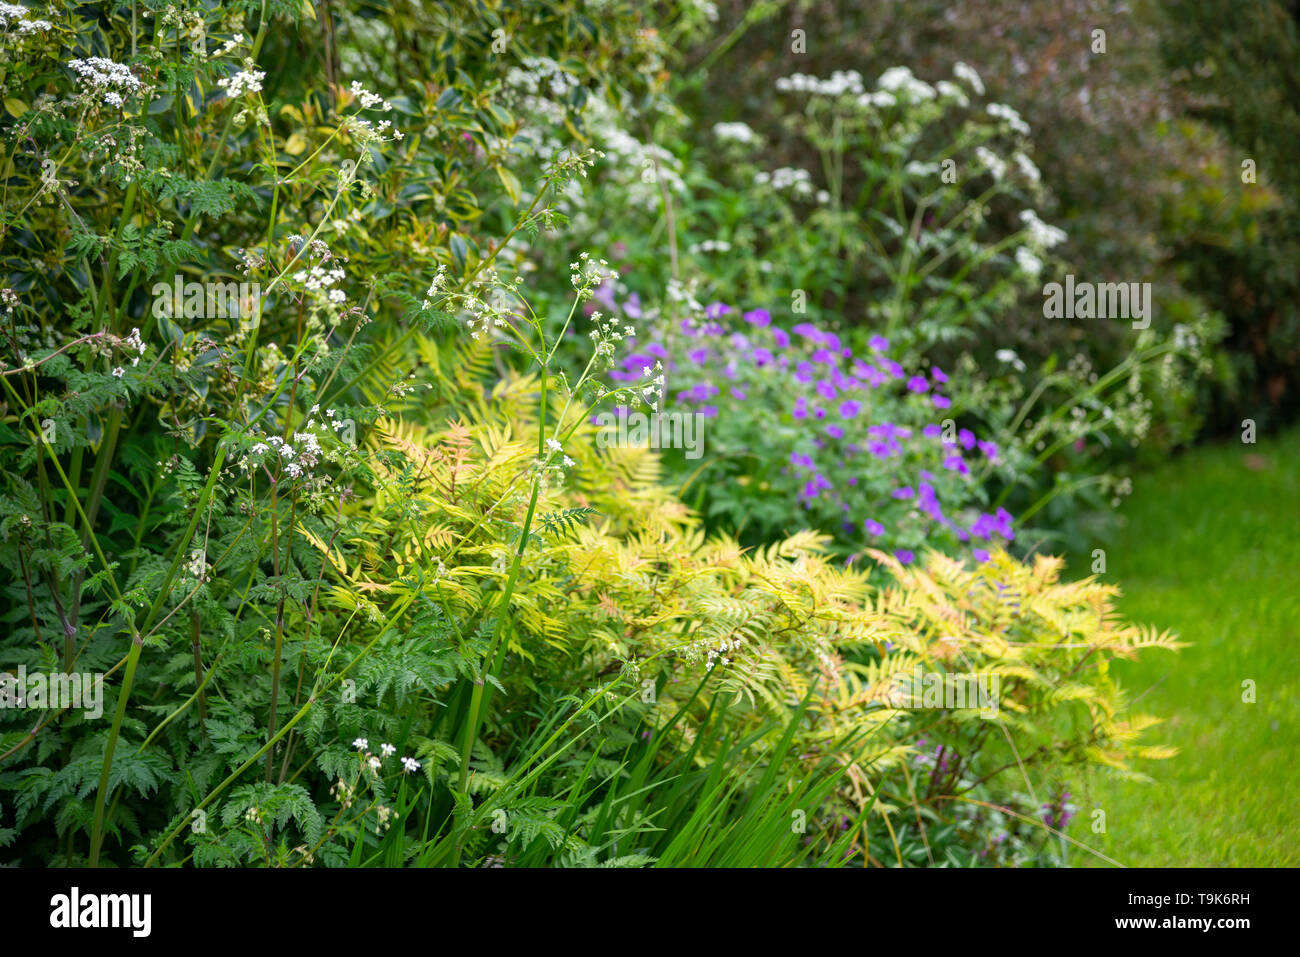 English cottage garden in mid May. An abundance of informal planting of shrubs and perennials. Stock Photo